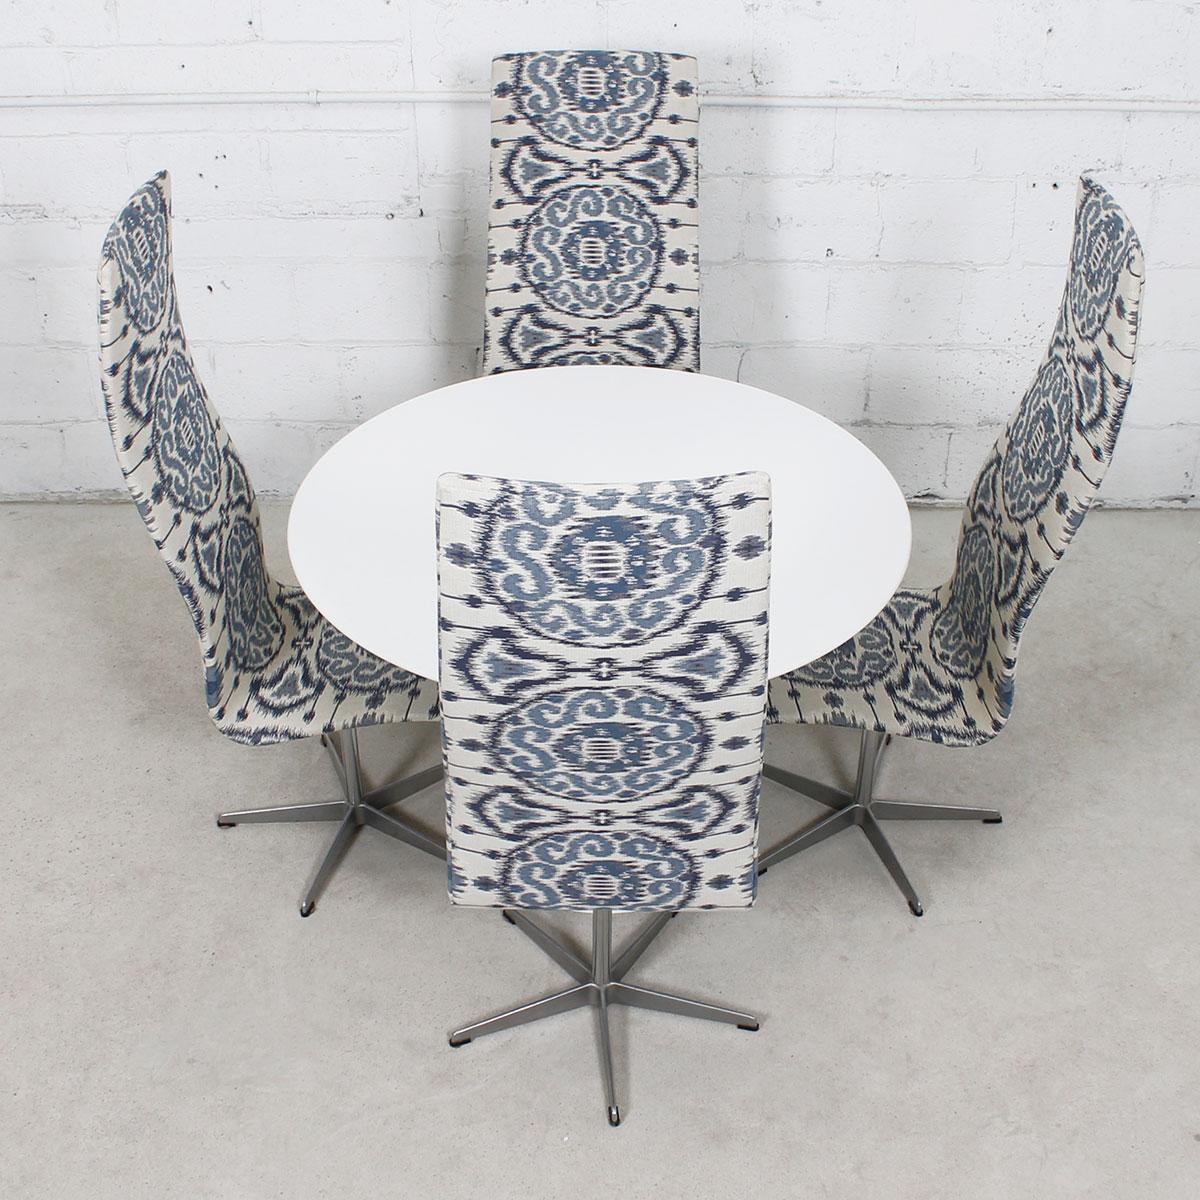 Set of 6 Vintage Fritz Hansen Oxford Chairs in New Blue & White Ikat Upholstery For Sale 7